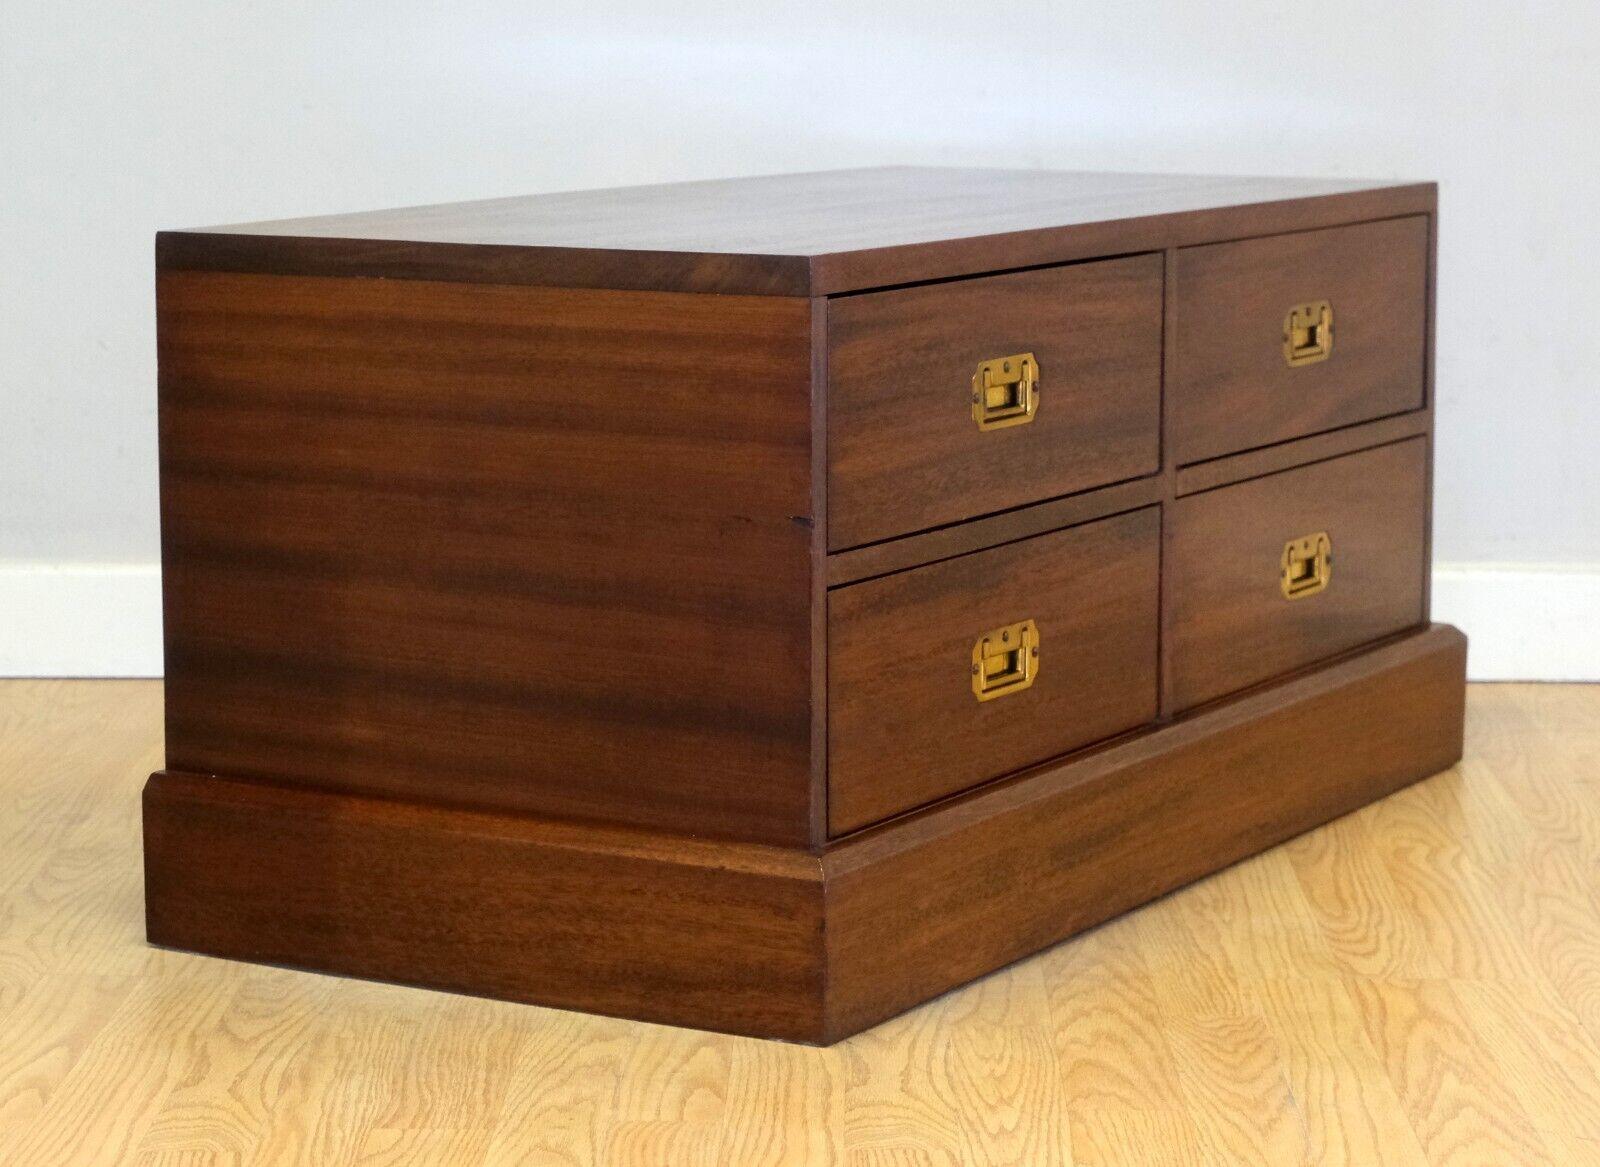 We are delighted to offer for sale this charming Military campaign brown Mahogany chest/tv stand.

This good looking, well made, and decorative piece is proudly presented with four good sized drawers which open smoothly. The rich coloured brass